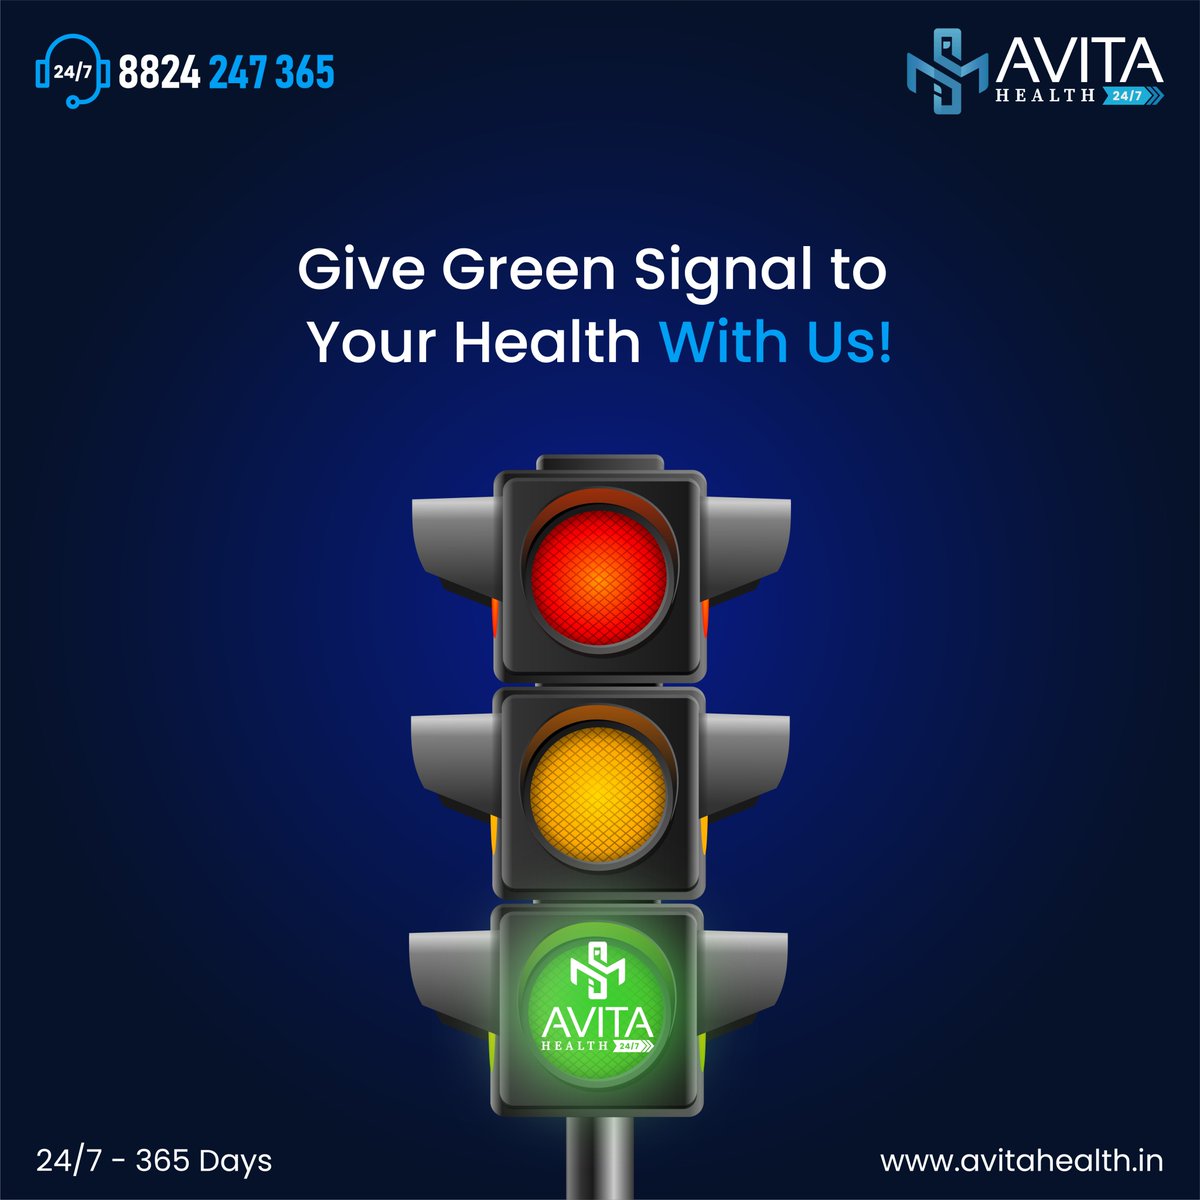 Coming Right at Your Doorstep

#AvitaHealth24x7 #AtHomeHealthcare #HomeHealthcare #HomeMedicalCare #DoctorOnCall #DoctorAtHome #DentalTreatments #AestheticTreatment #future #healthcarefuture #fasthealthy #health #healthcare #health #healthyhabits #healthychoices